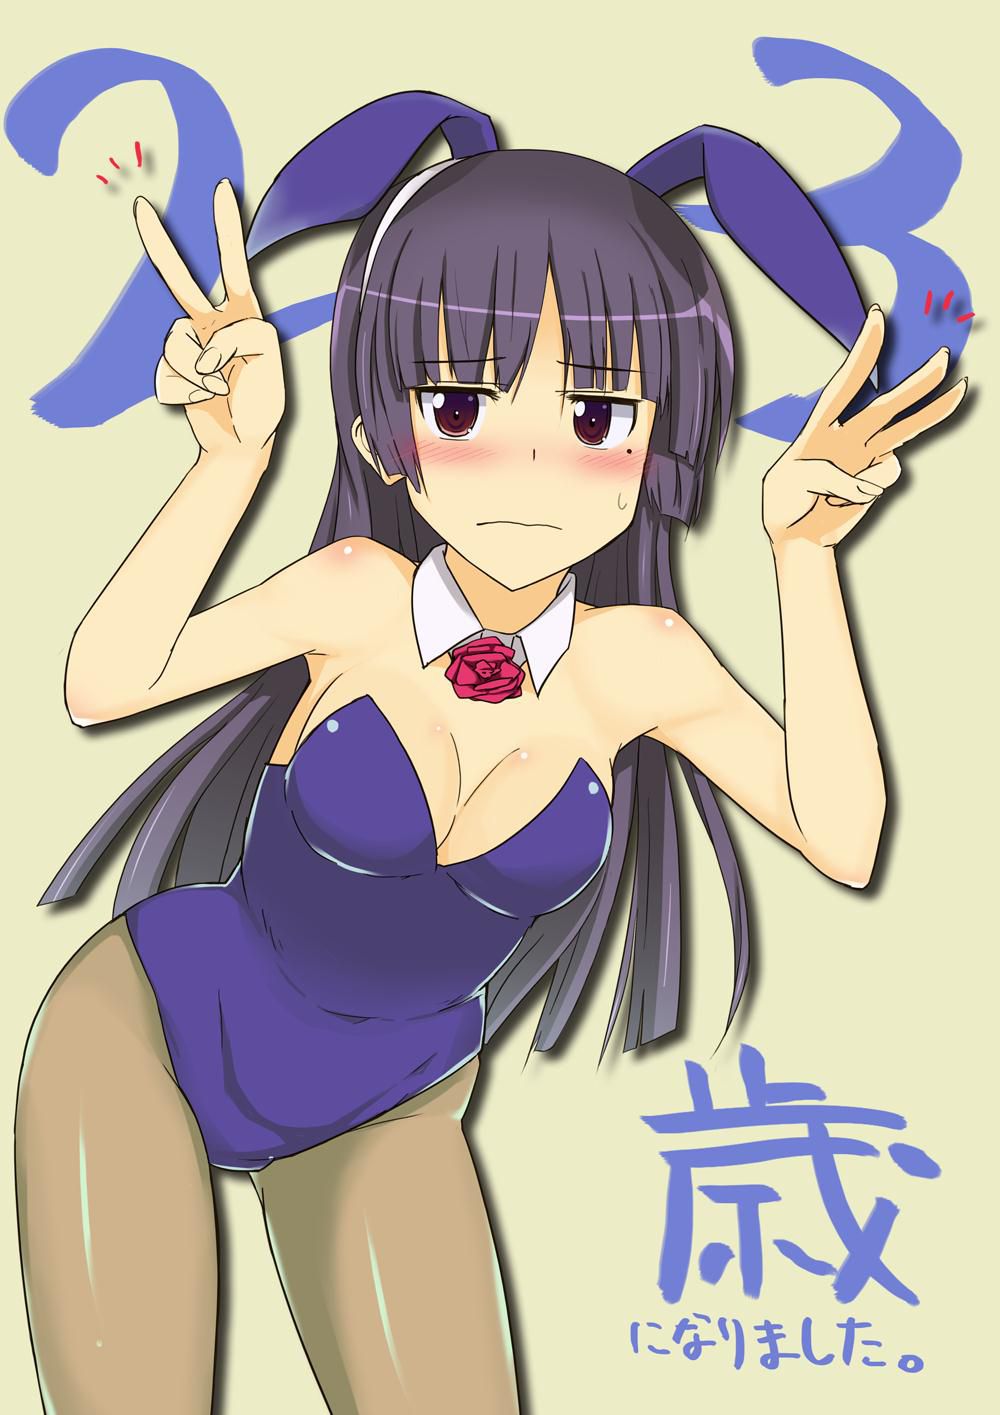 Bunny Girl's secondary image is too much for embarrassed 4